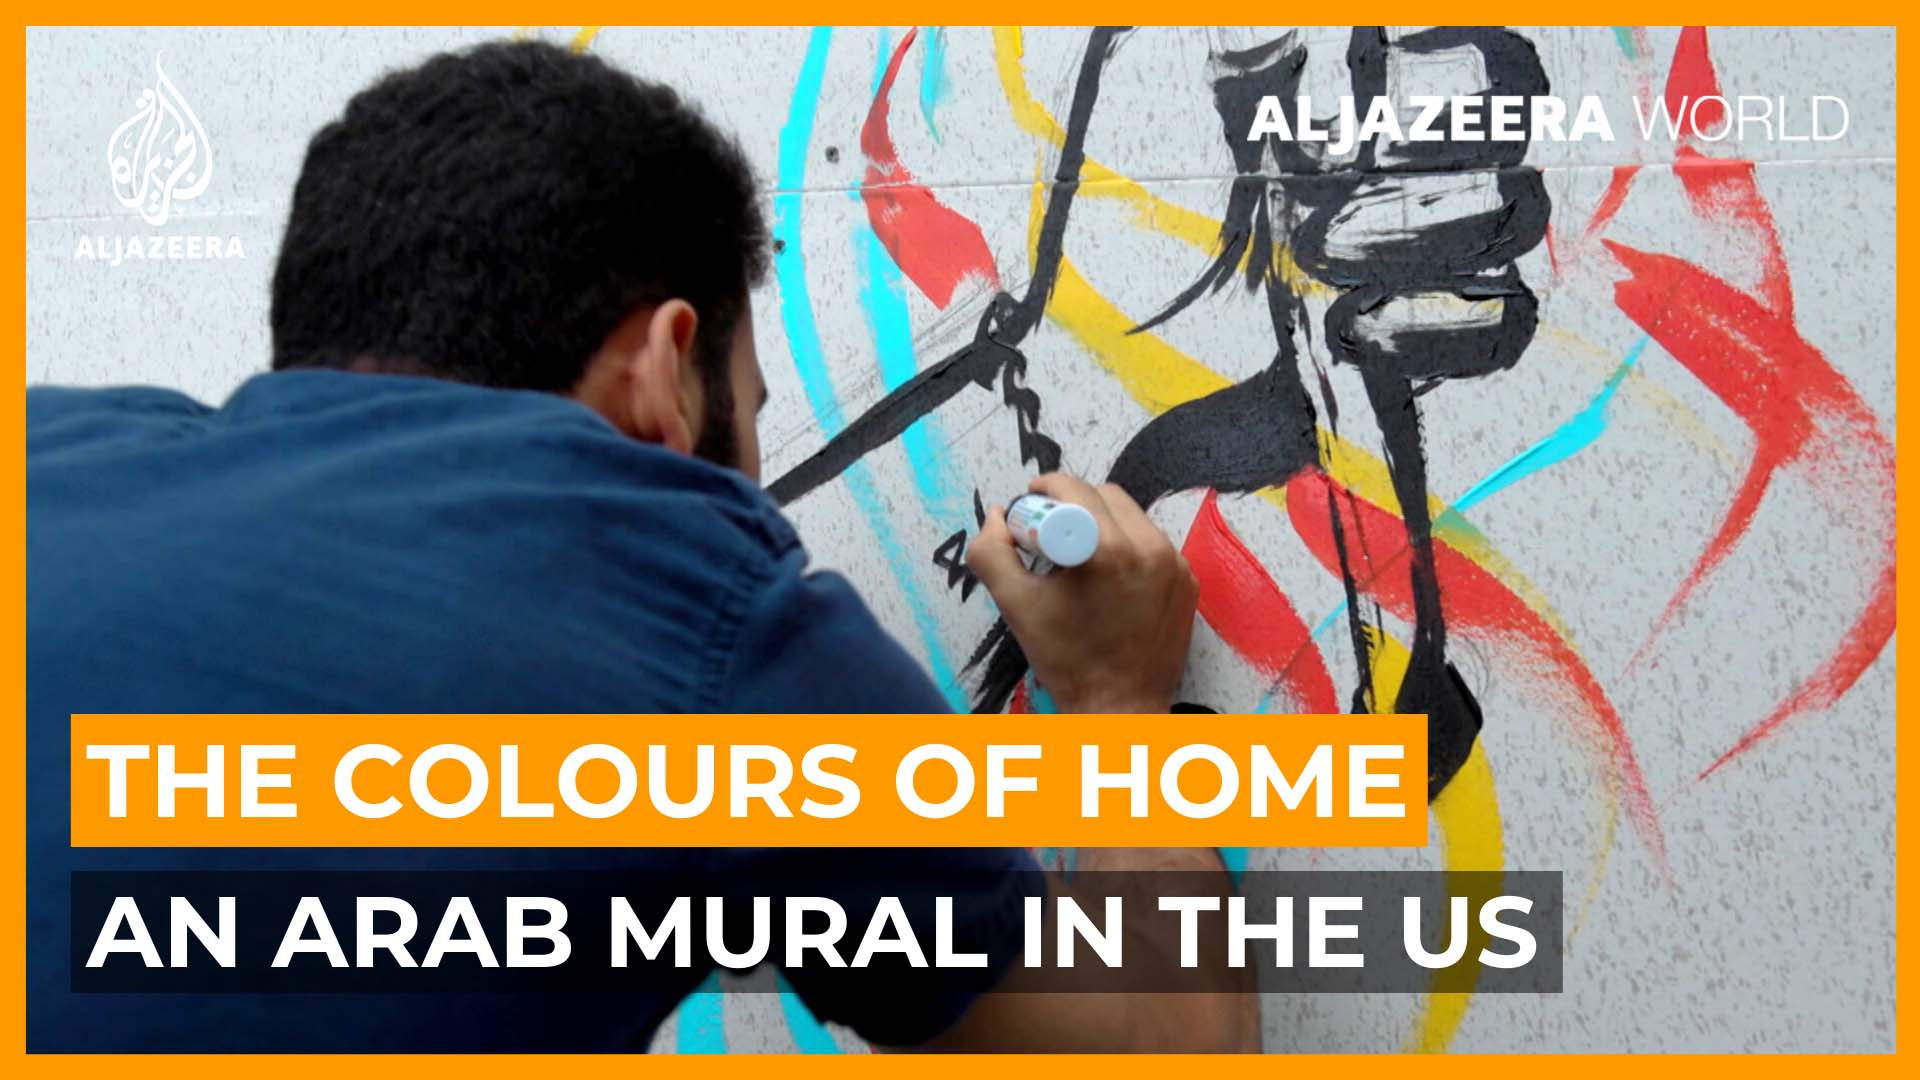 The Colours of Home: An Arab mural in the US | Al Jazeera World